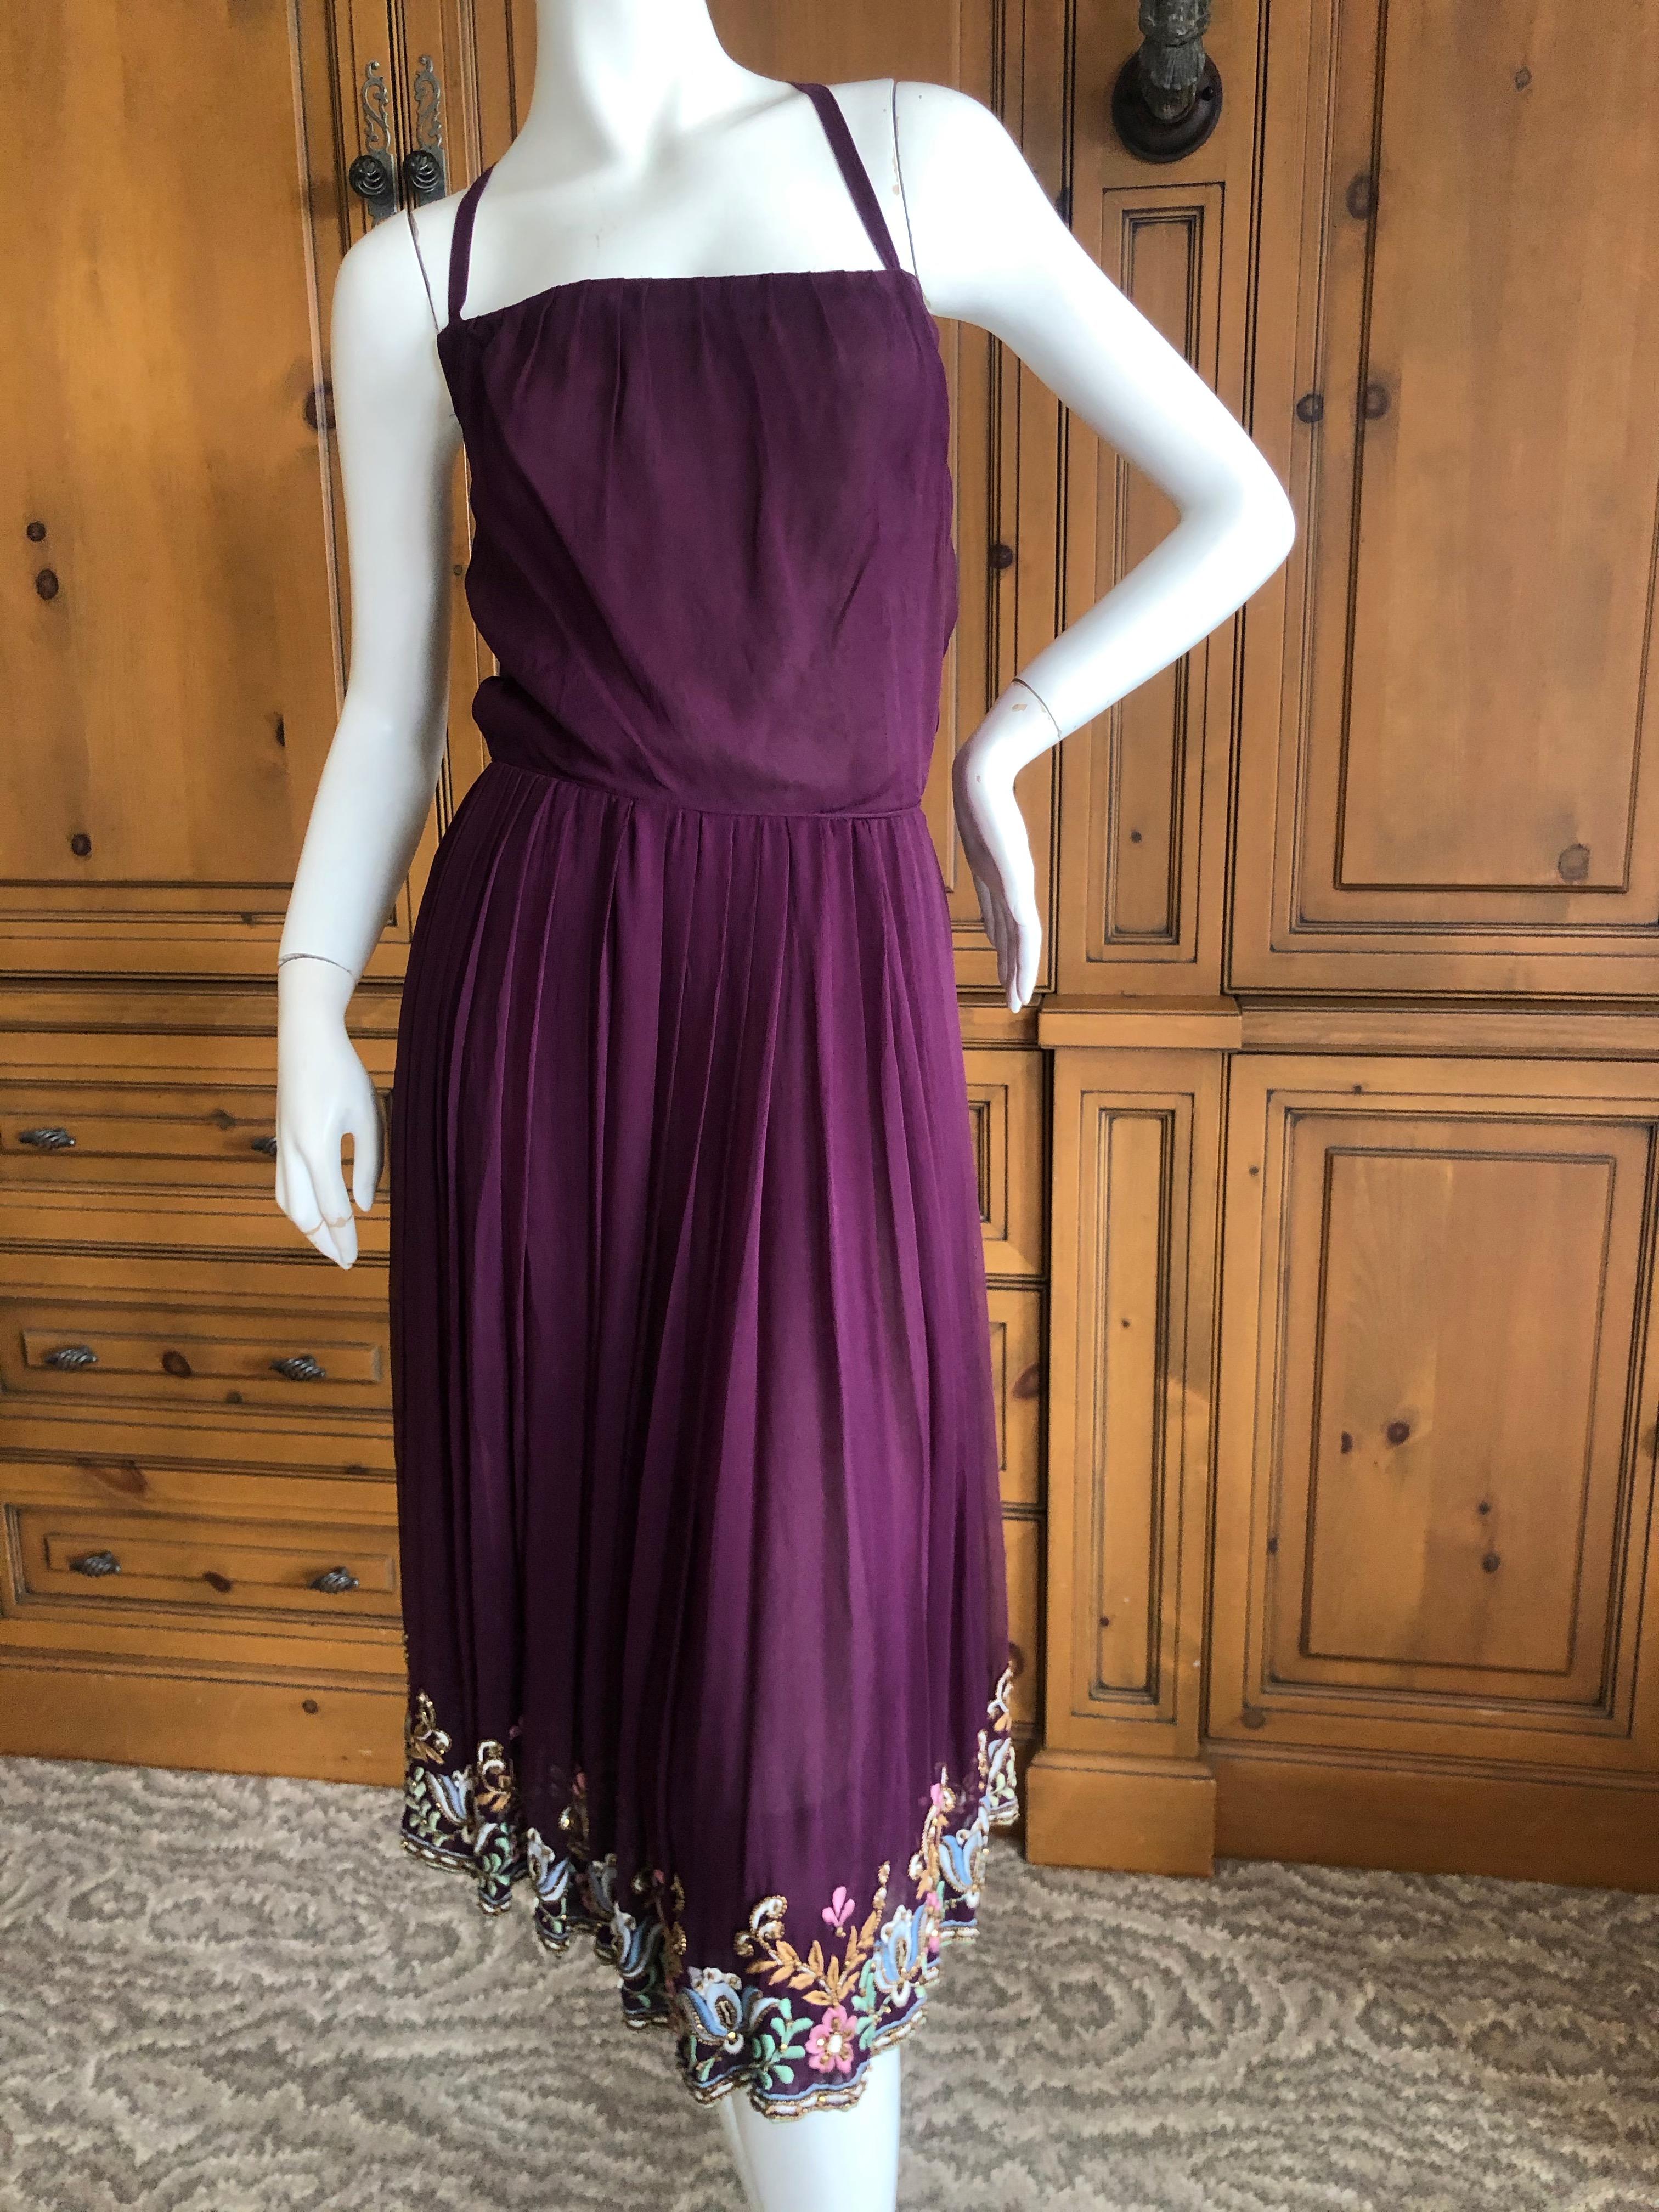 Christian Dior London 1960's Numbered Haute Couture Dress w Lesage Embellishment In Excellent Condition For Sale In Cloverdale, CA